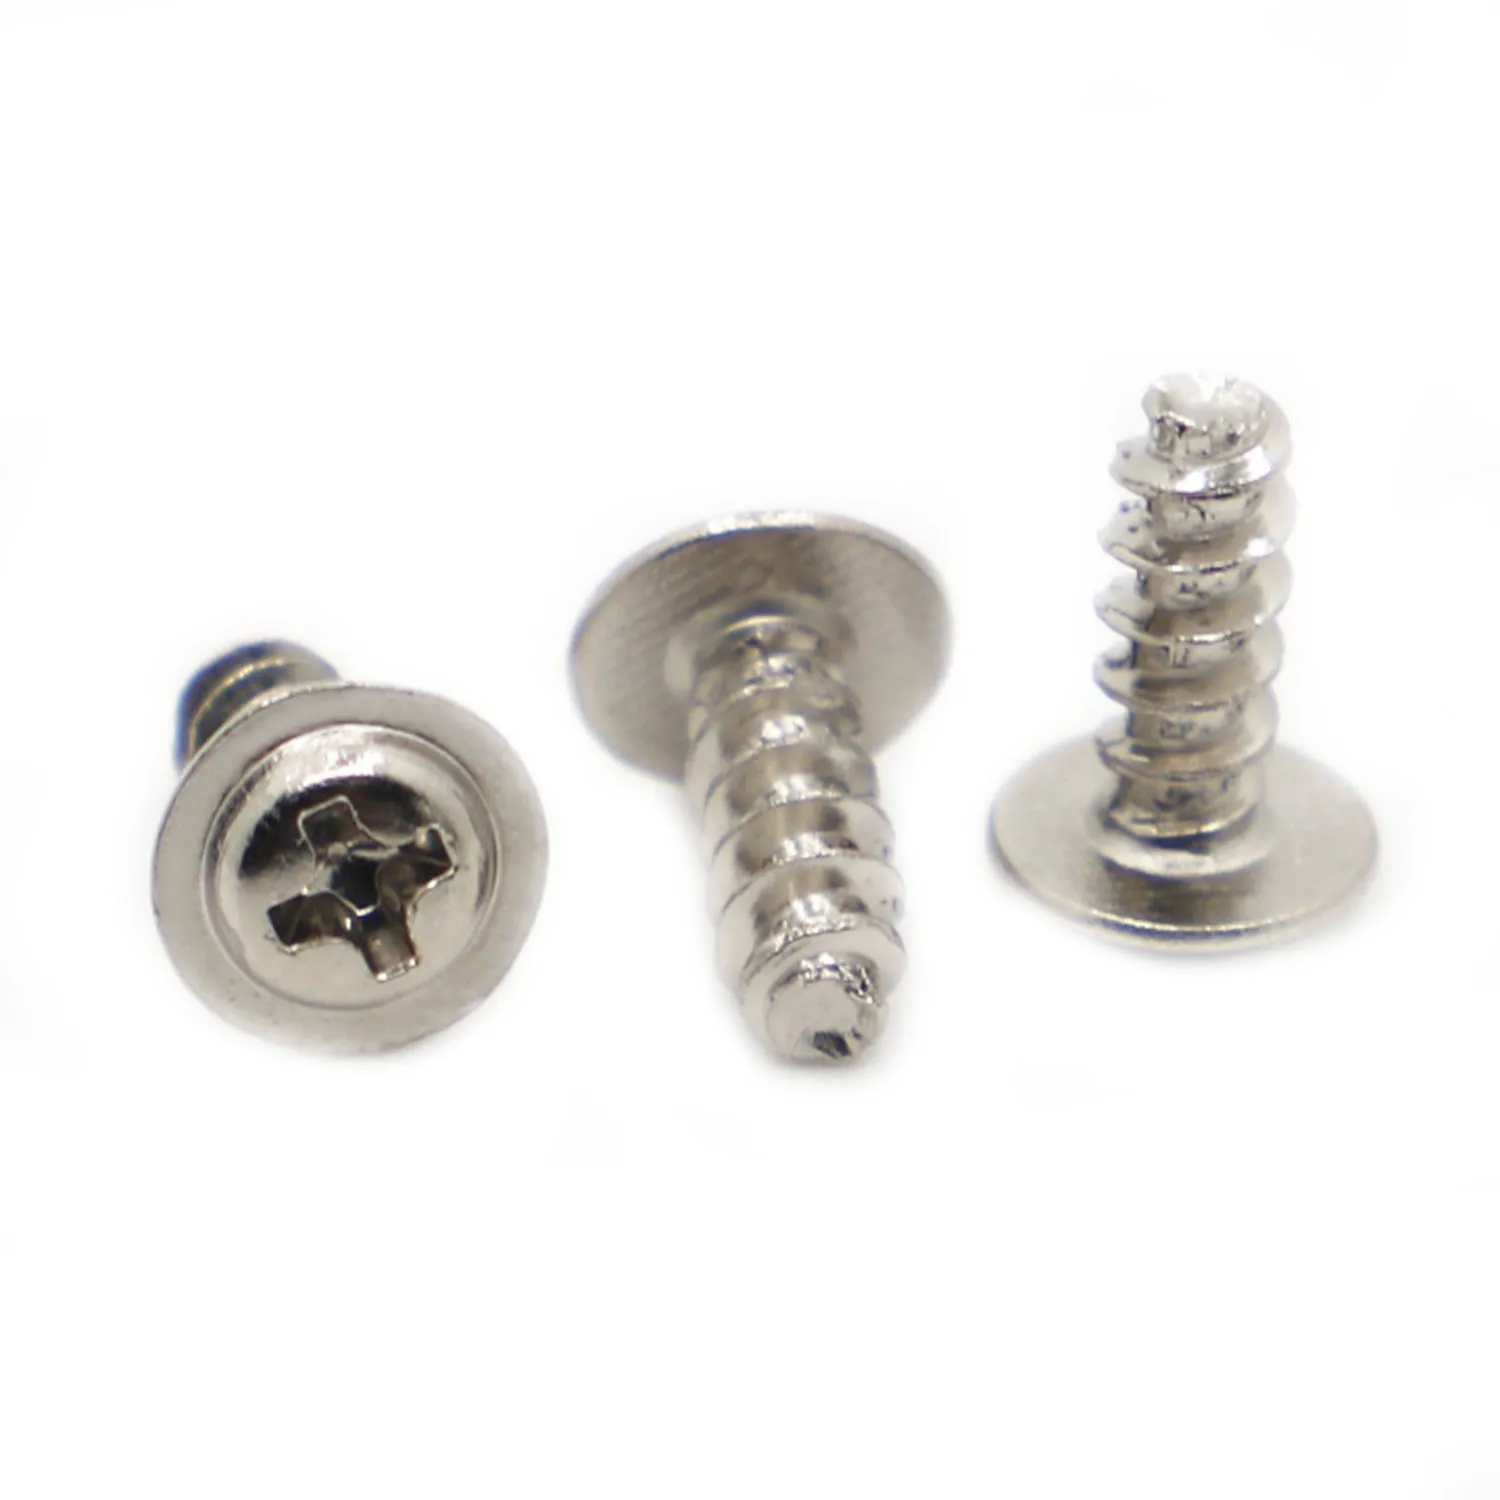 

50pcs Nickel Plated Steel PWB Screw M1.4 M1.7 M2 M2.3 M2.6 M3 M4 Phillips Pan Head Flat Tail Self Tapping Screws With Washer